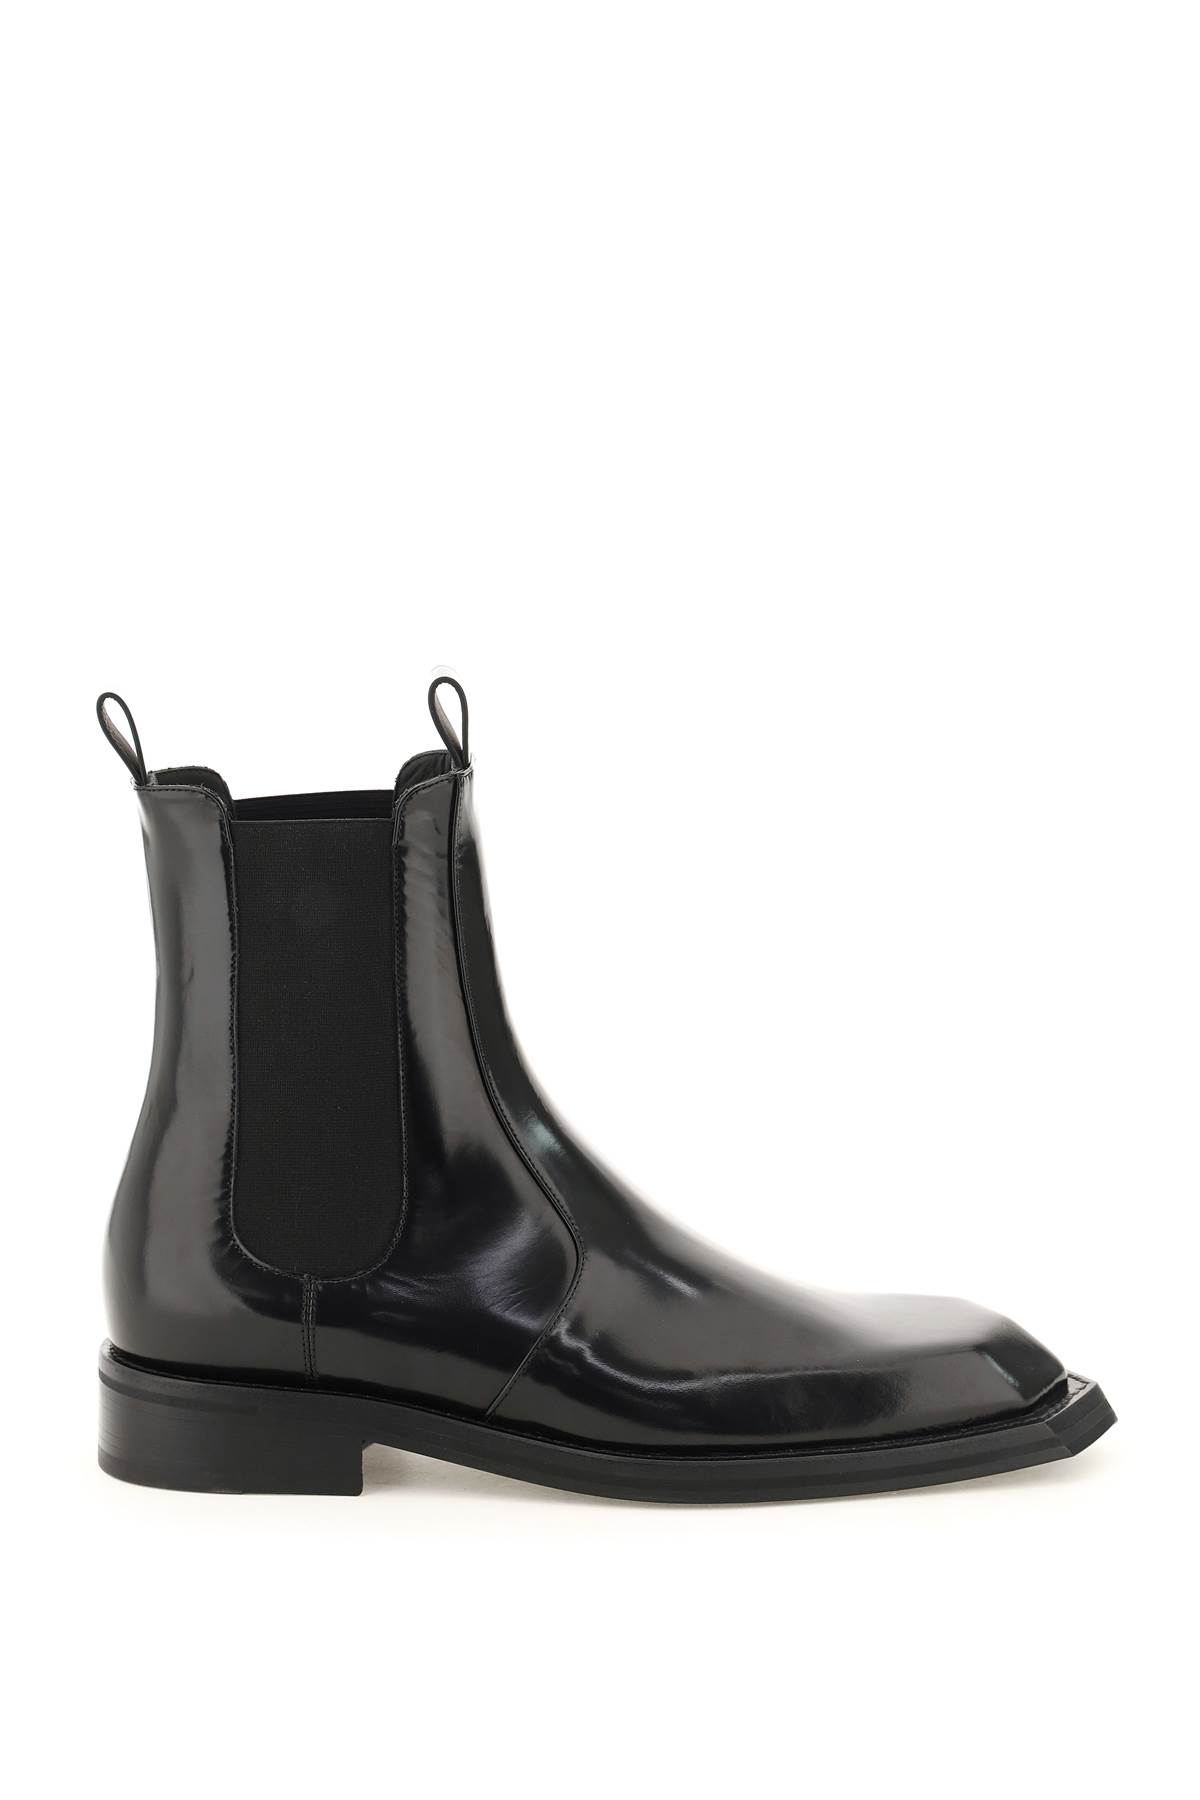 Martine Rose Brushed Leather Chelsea Boots